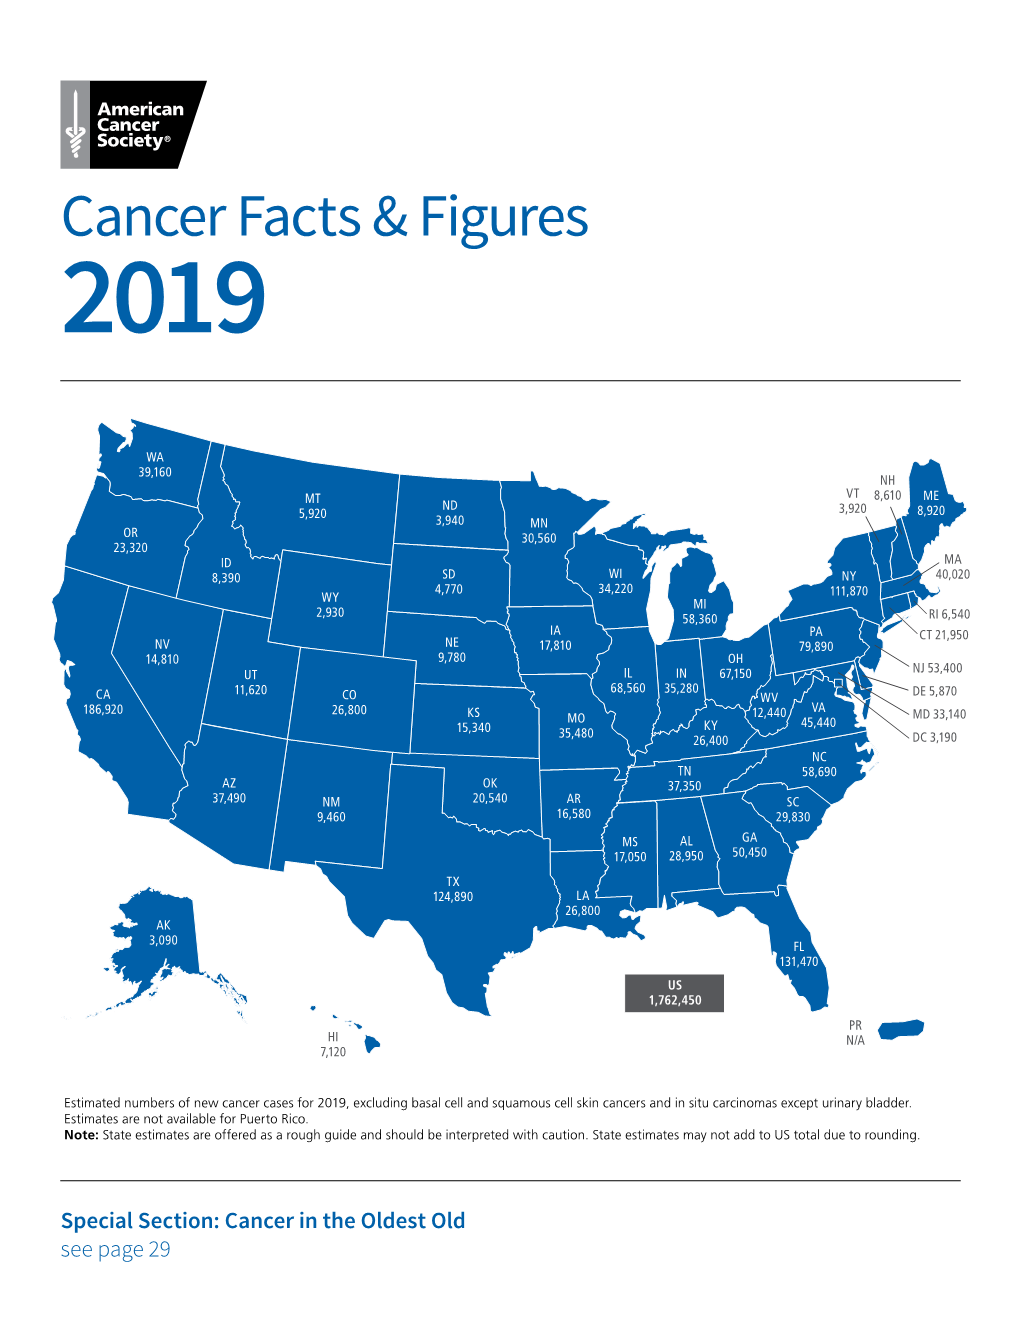 Cancer Facts & Figures 2019